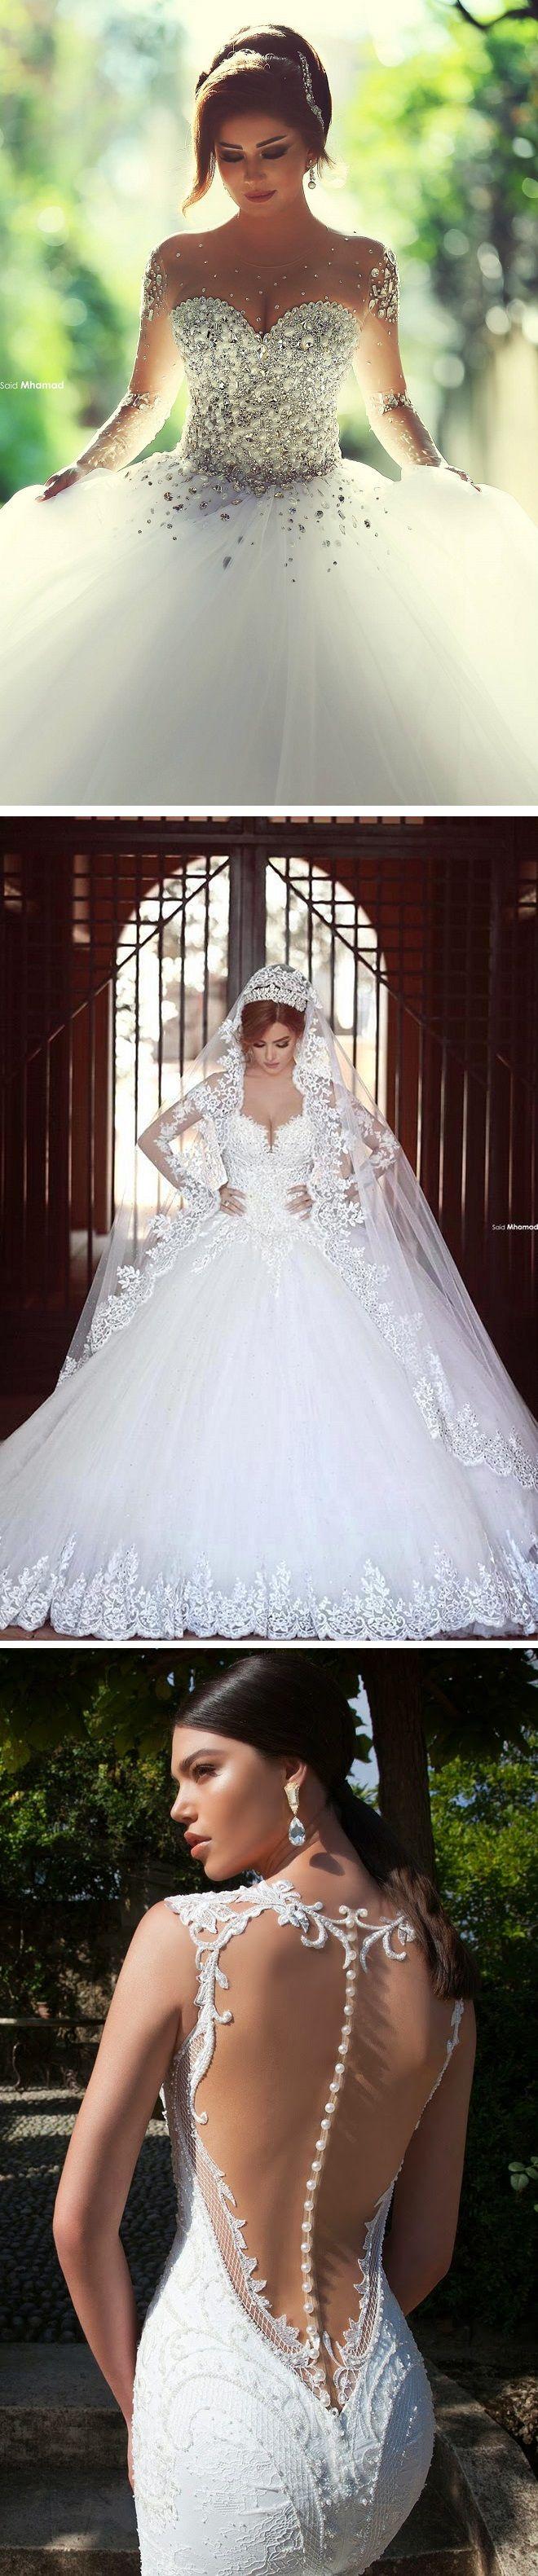 Wedding - 10 Jaw-Droppingly Beautiful Wedding Dresses To Obsess Over!